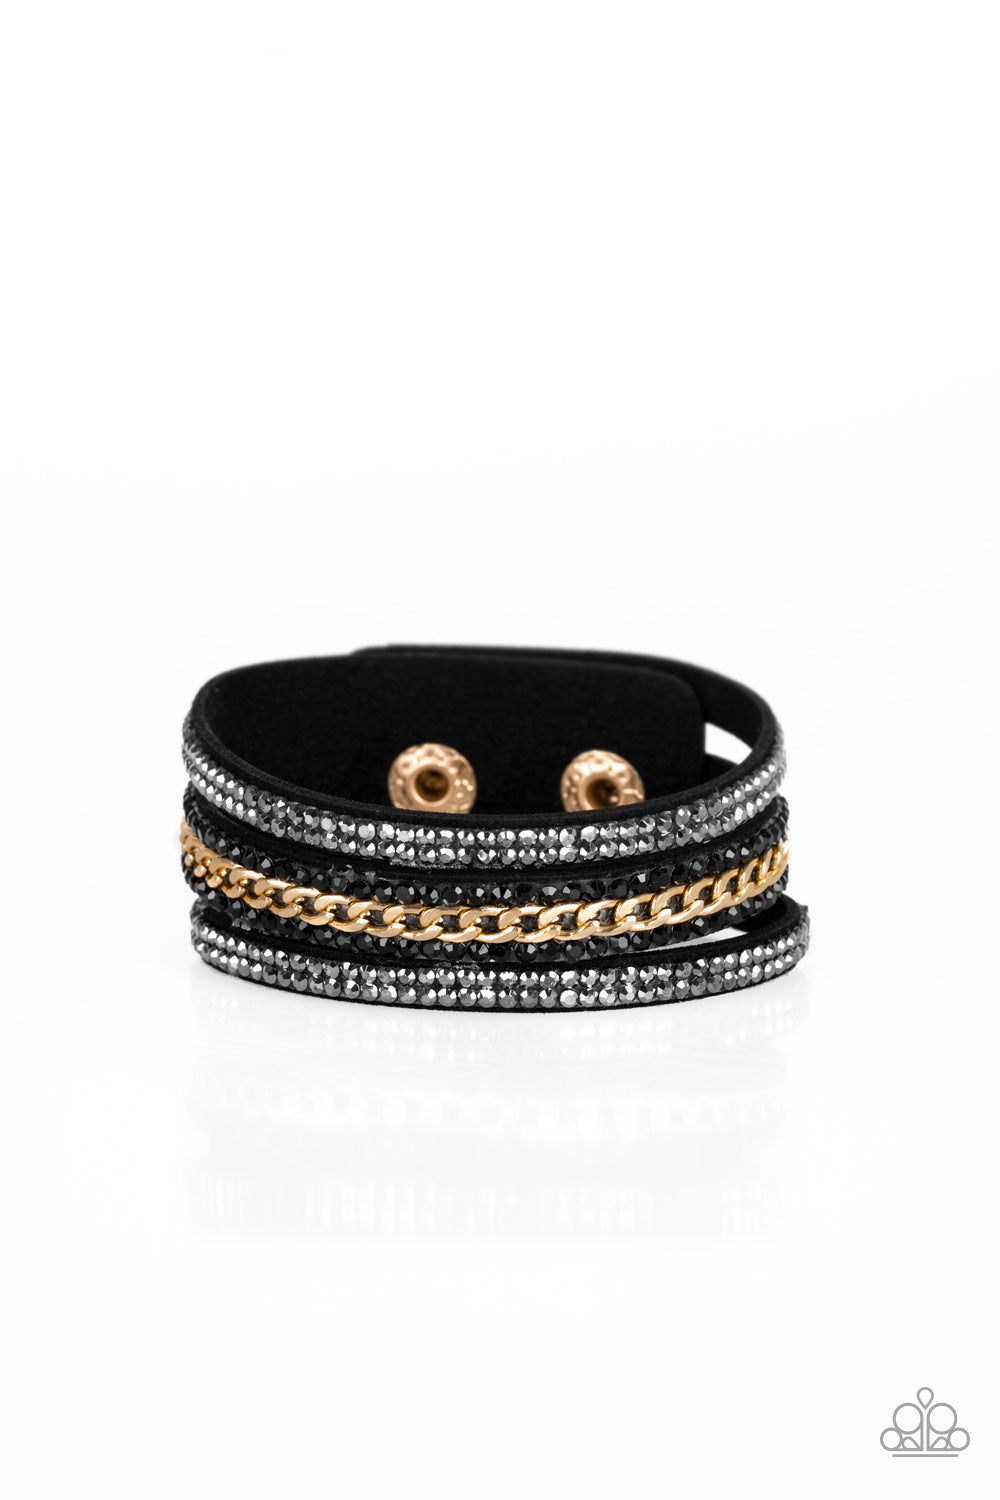 Rows of glassy hematite and black rhinestones and a shimmery gold chain are encrusted along black suede bands for a sassy look. Features an adjustable snap closure.